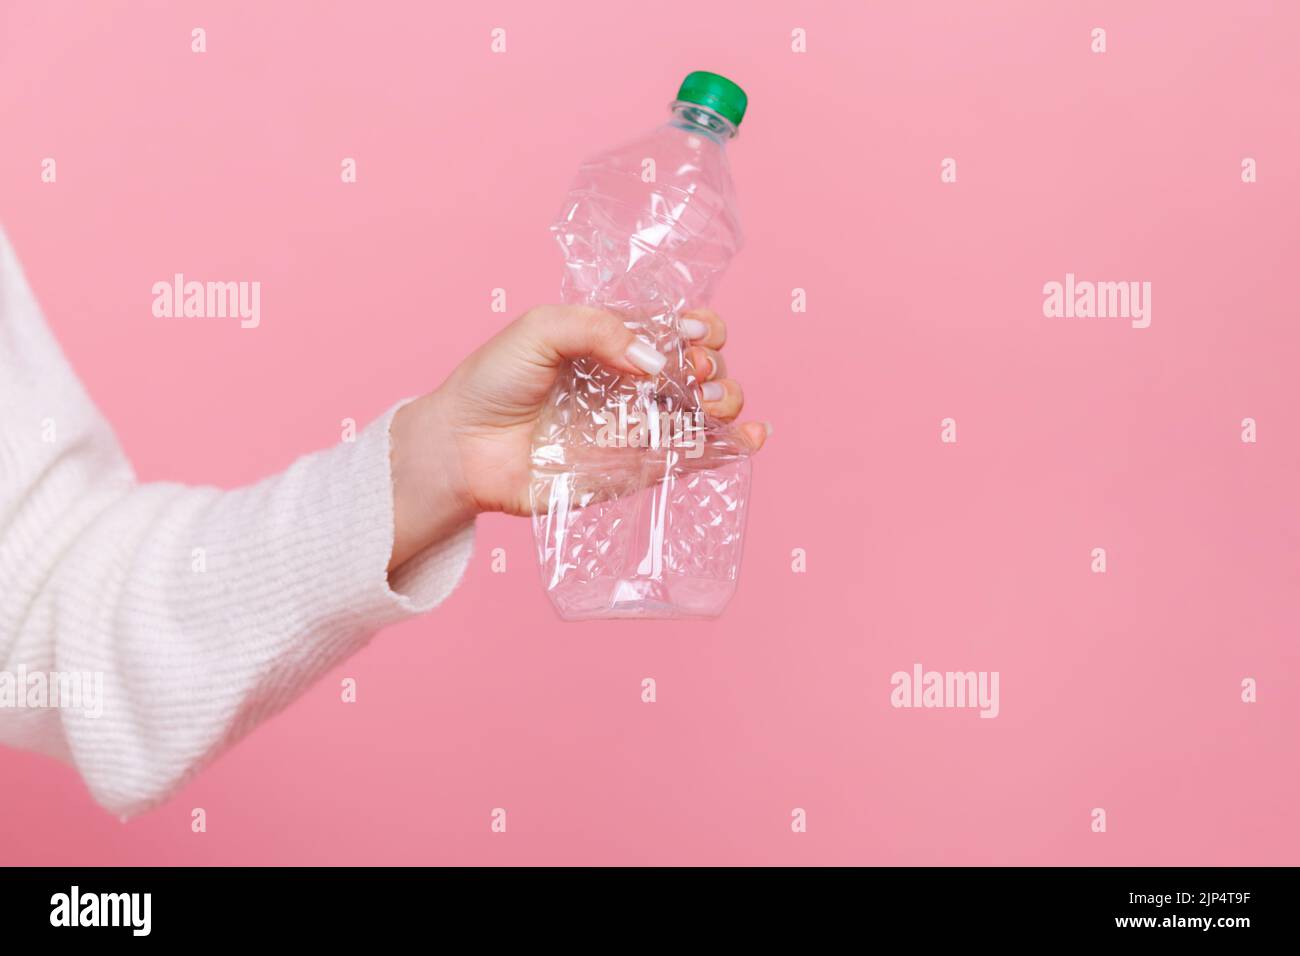 Female hand holding plastic bottle with green cap, sorting her rubbish, worrying about environment, wearing white casual style sweater. Indoor studio shot isolated on pink background. Stock Photo